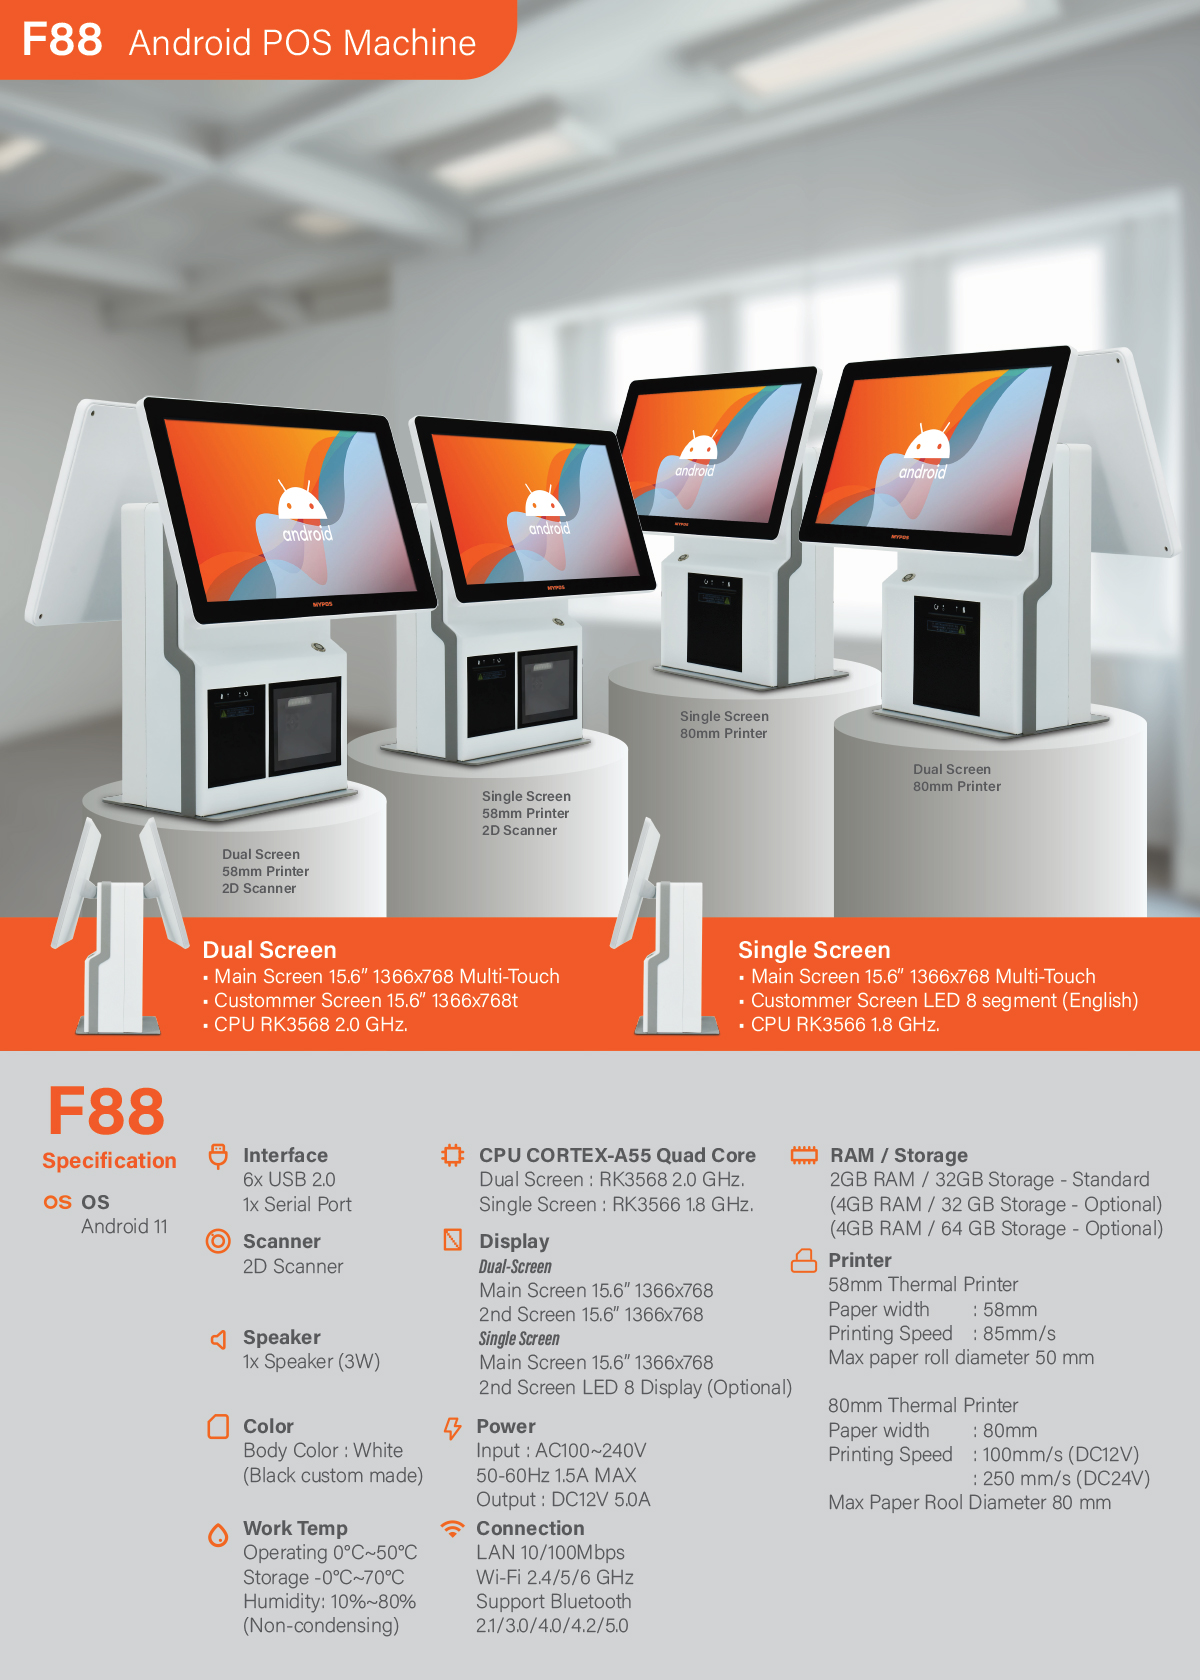 F-88 Android POS Machine